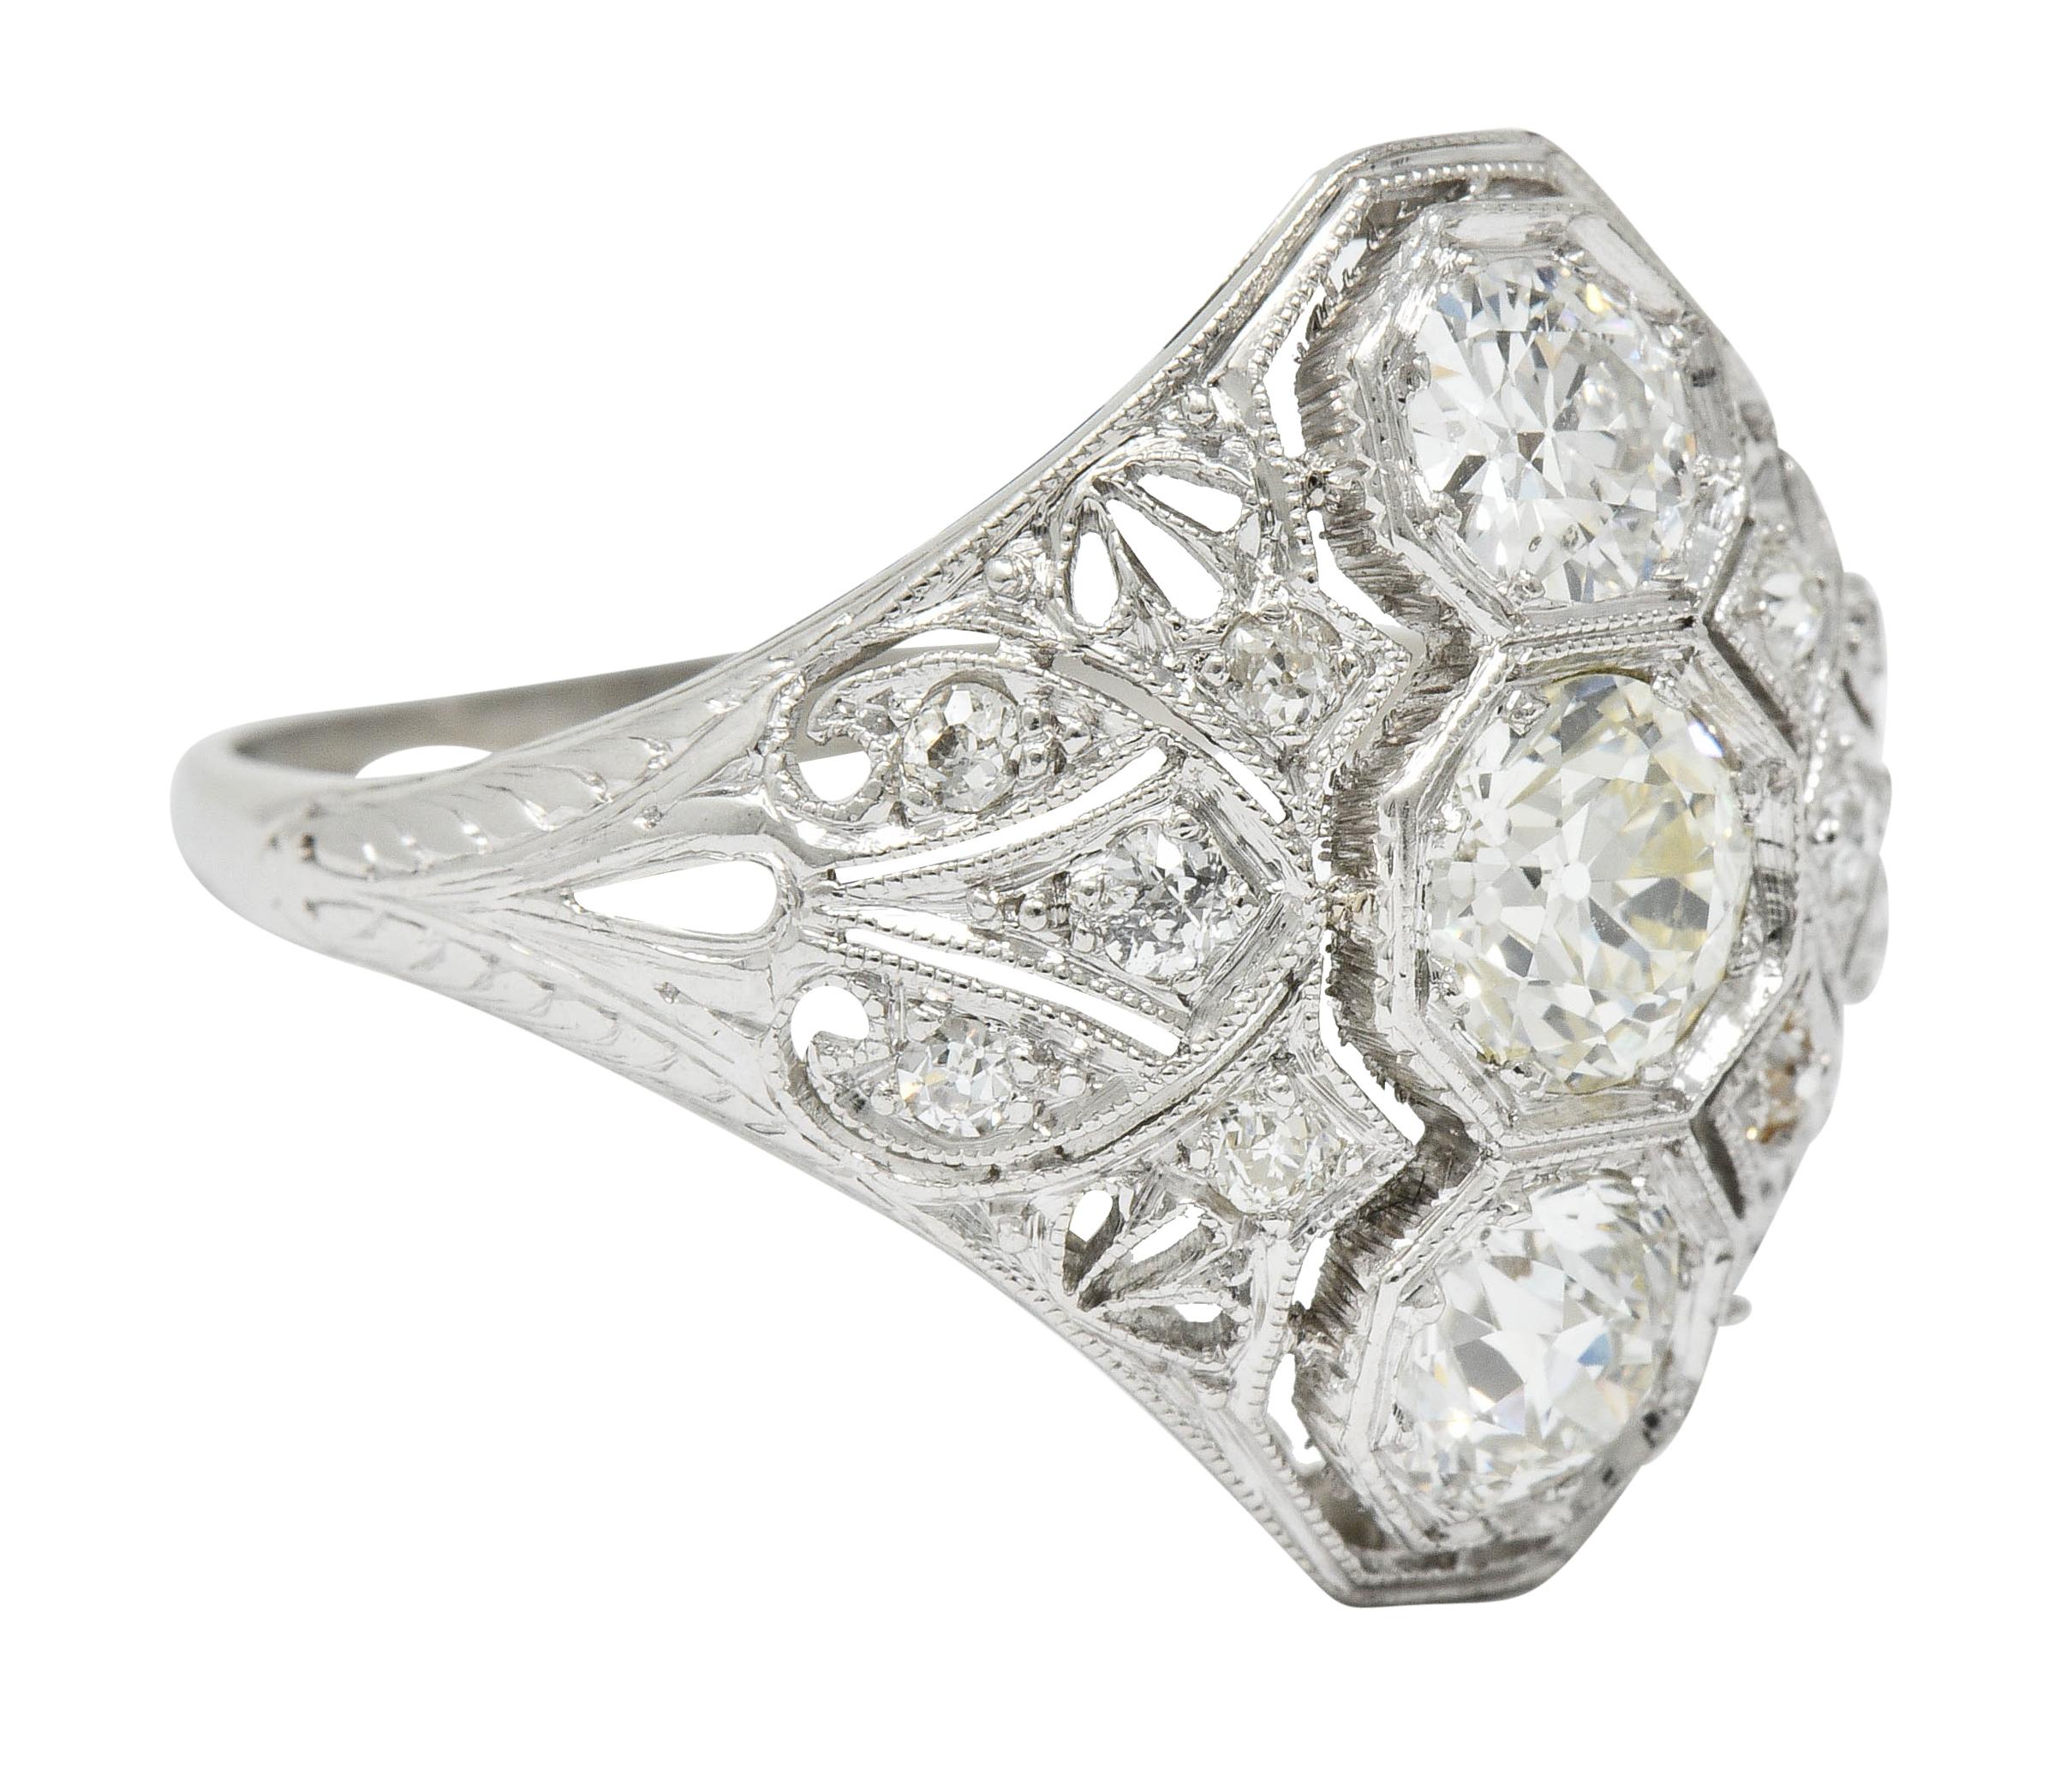 Dinner style ring with pierced details, milgrain edges, and engraved foliate shoulders

Centering three old European cut diamonds weighing in total approximately 1.35 carats

Set low in hexagonal heads, North to South, with I to K color and VS in